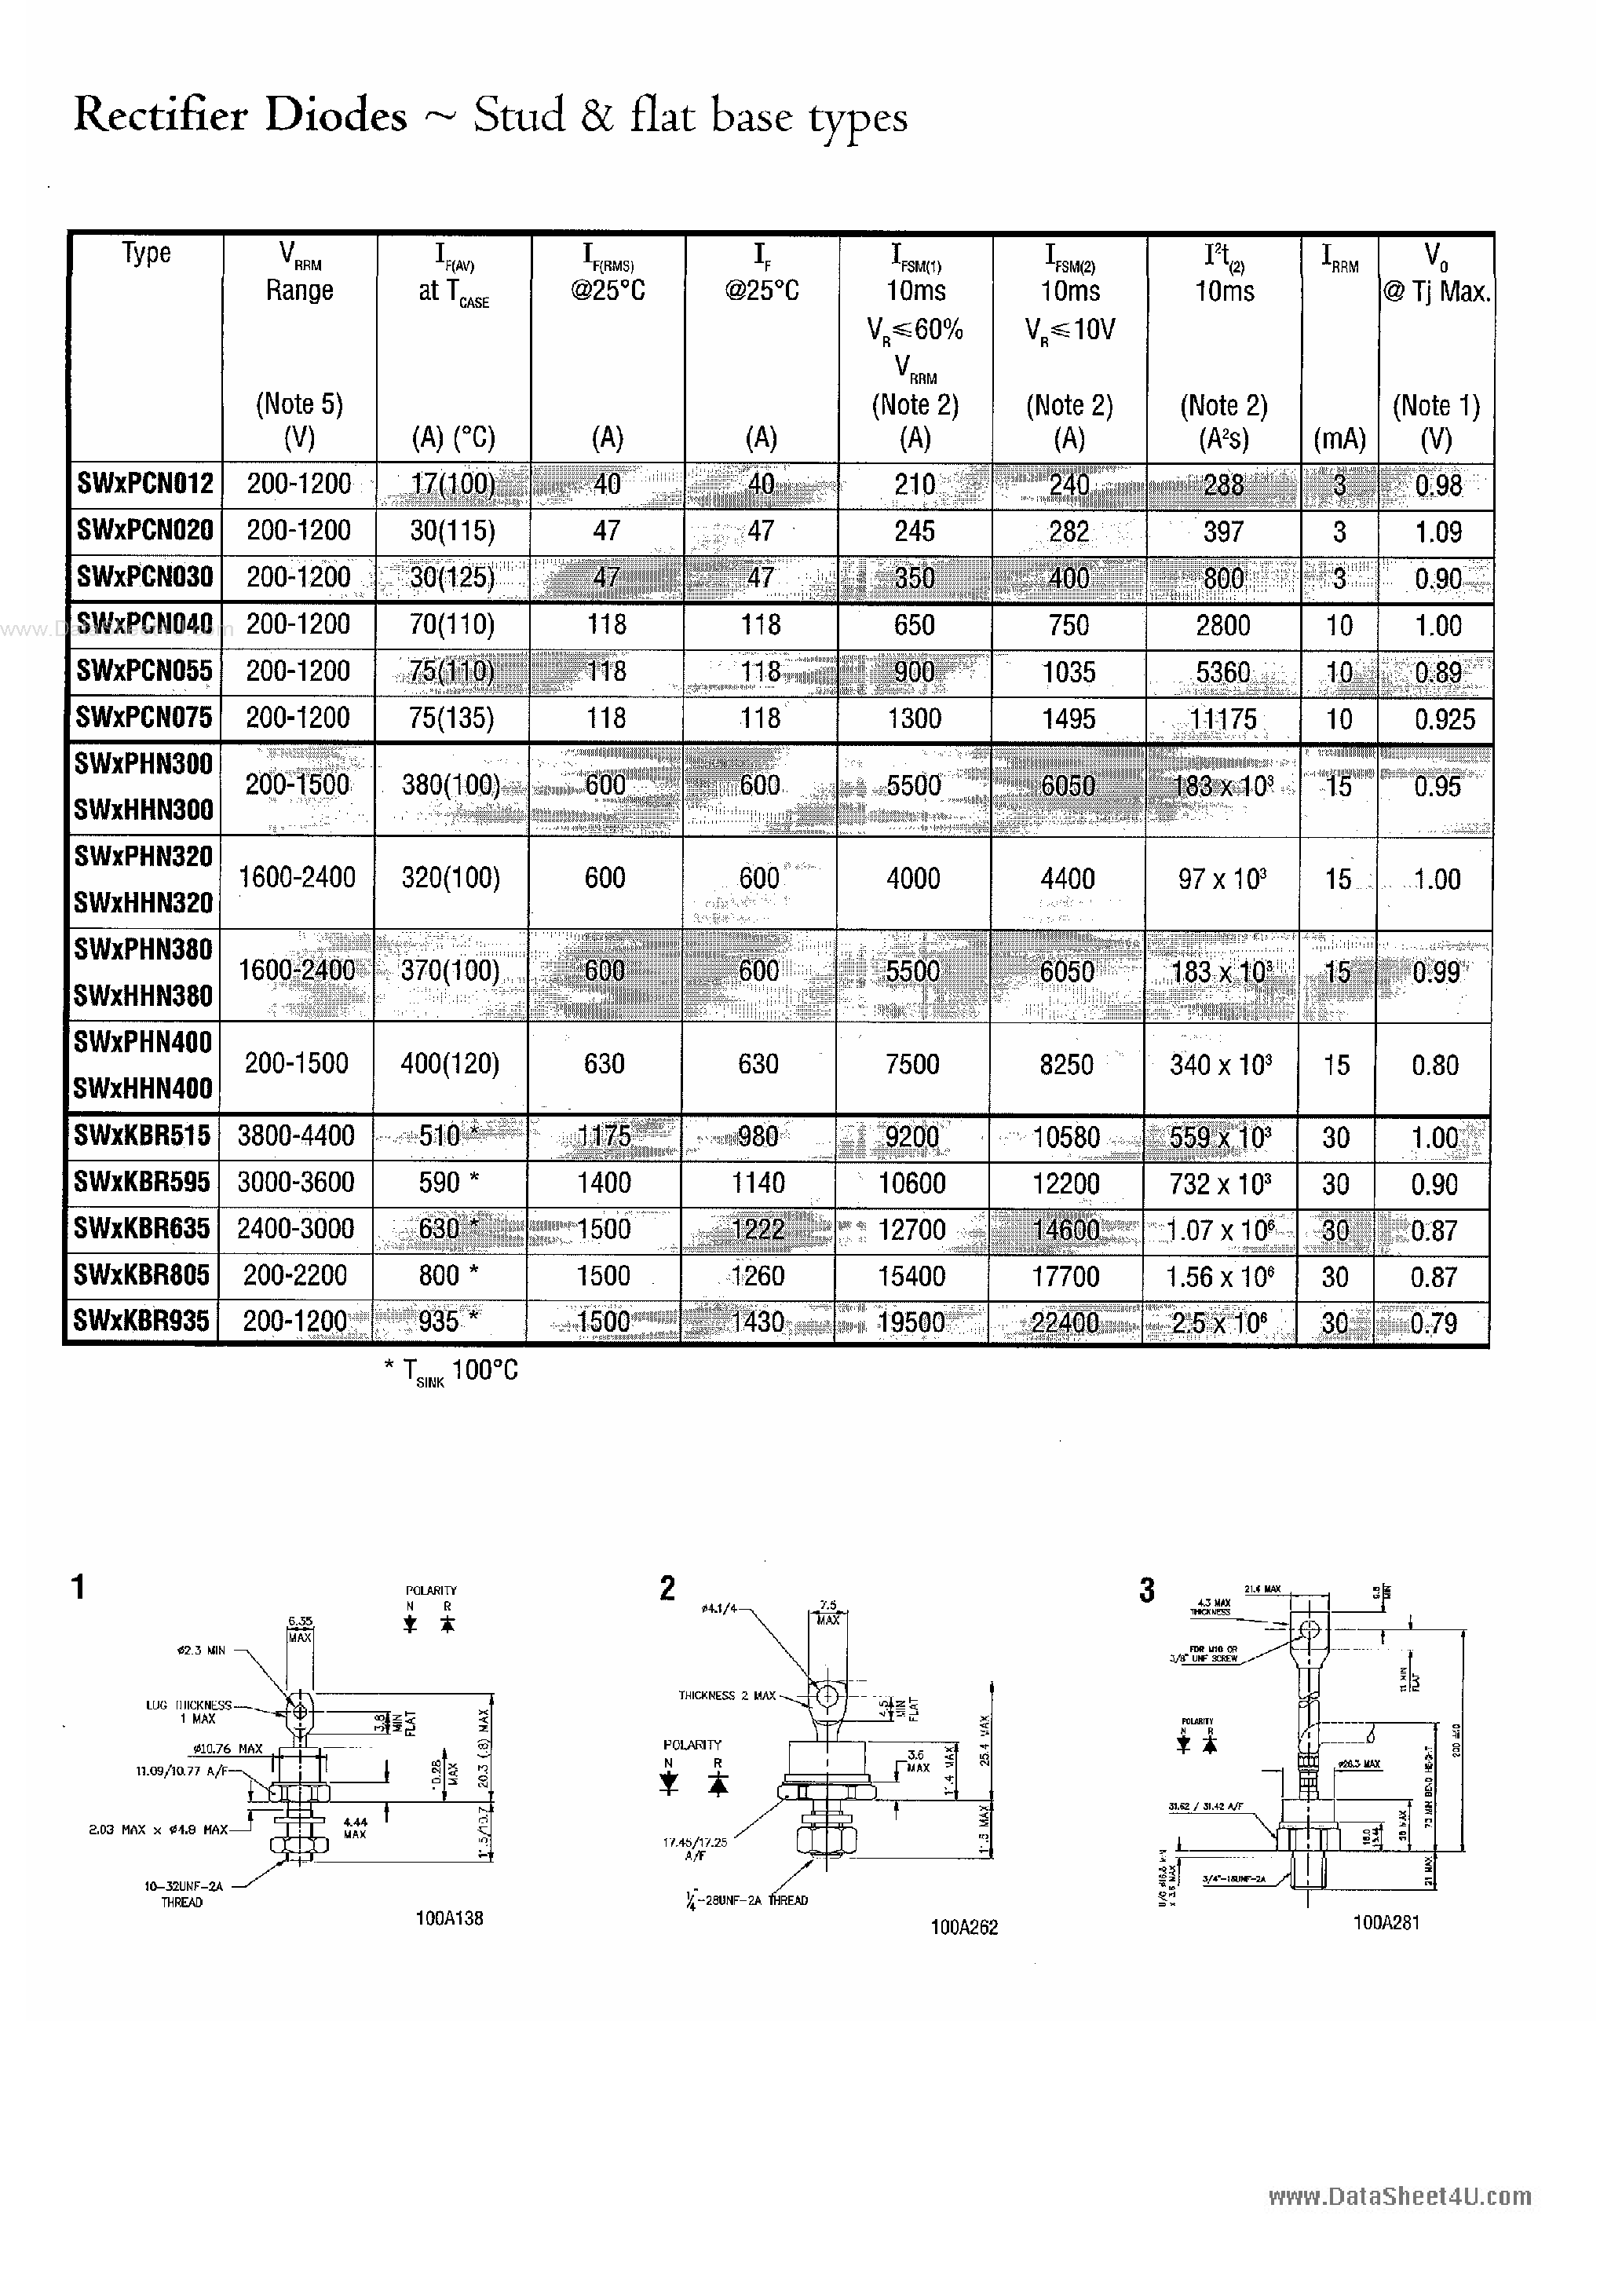 Datasheet SWXHHNxxx - RECTIFIER DIODES STUD AND FLAT BASE TYPES page 1